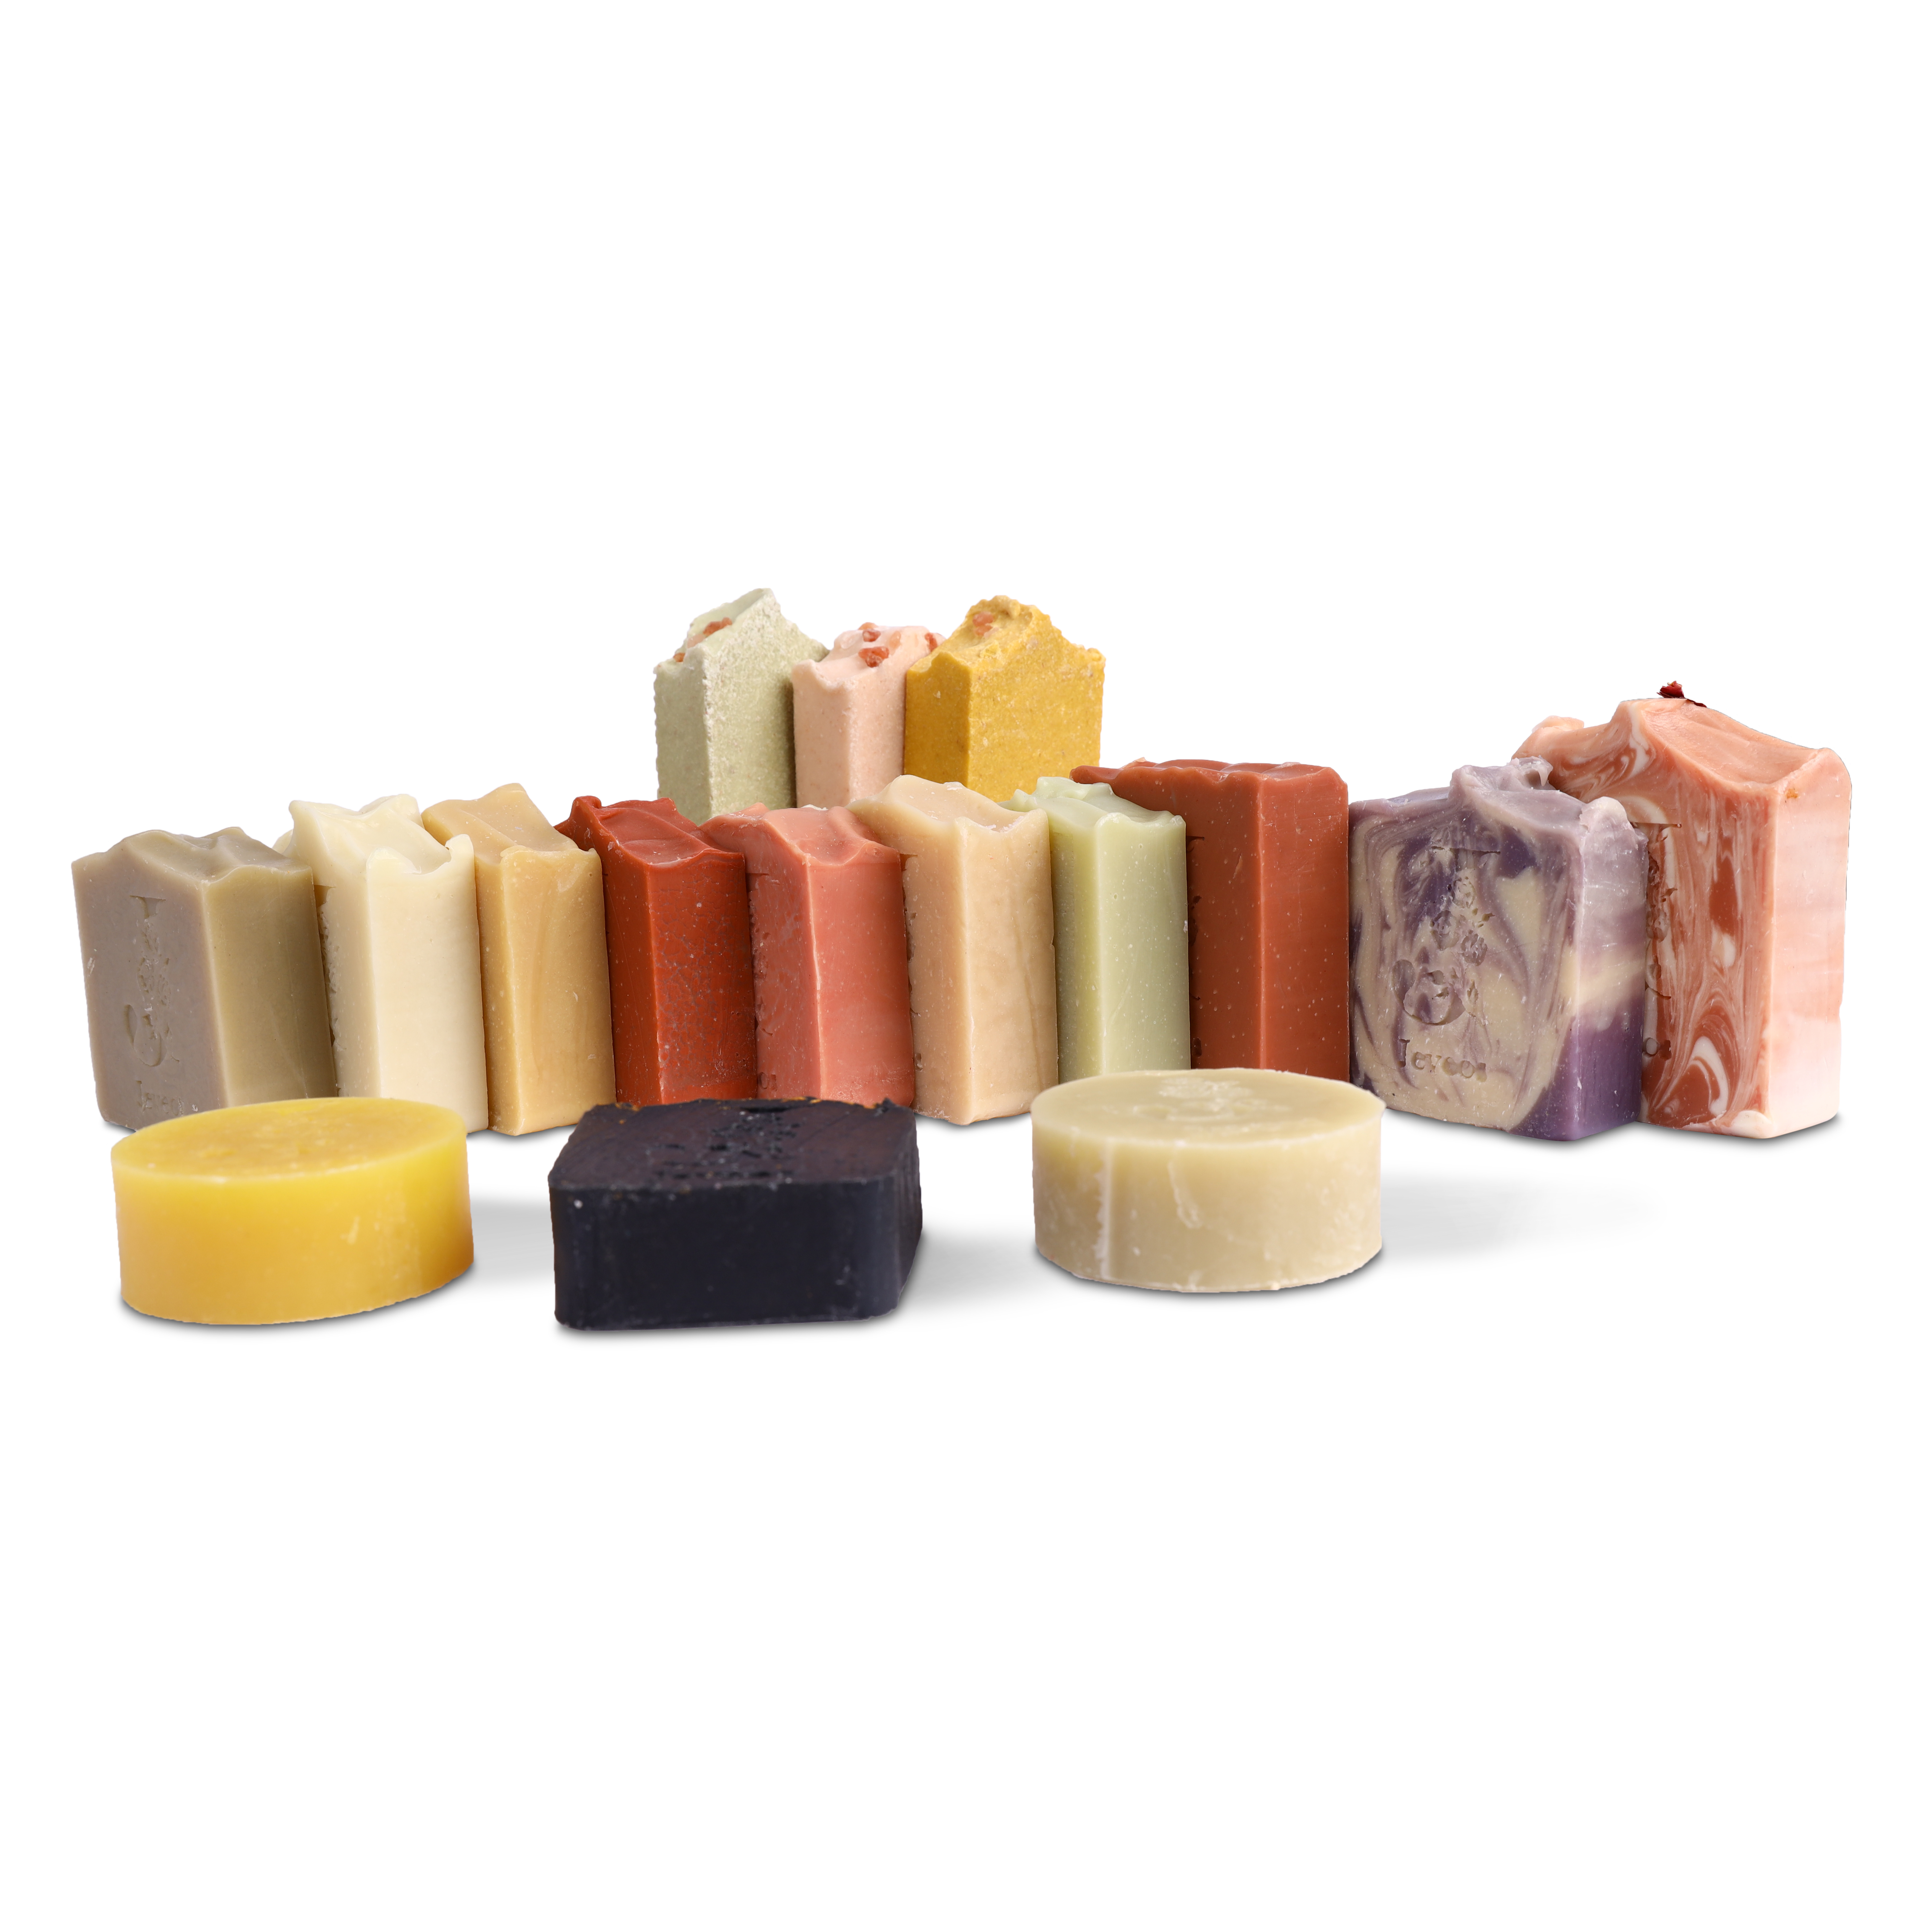 Design & Customize Your Soaps online